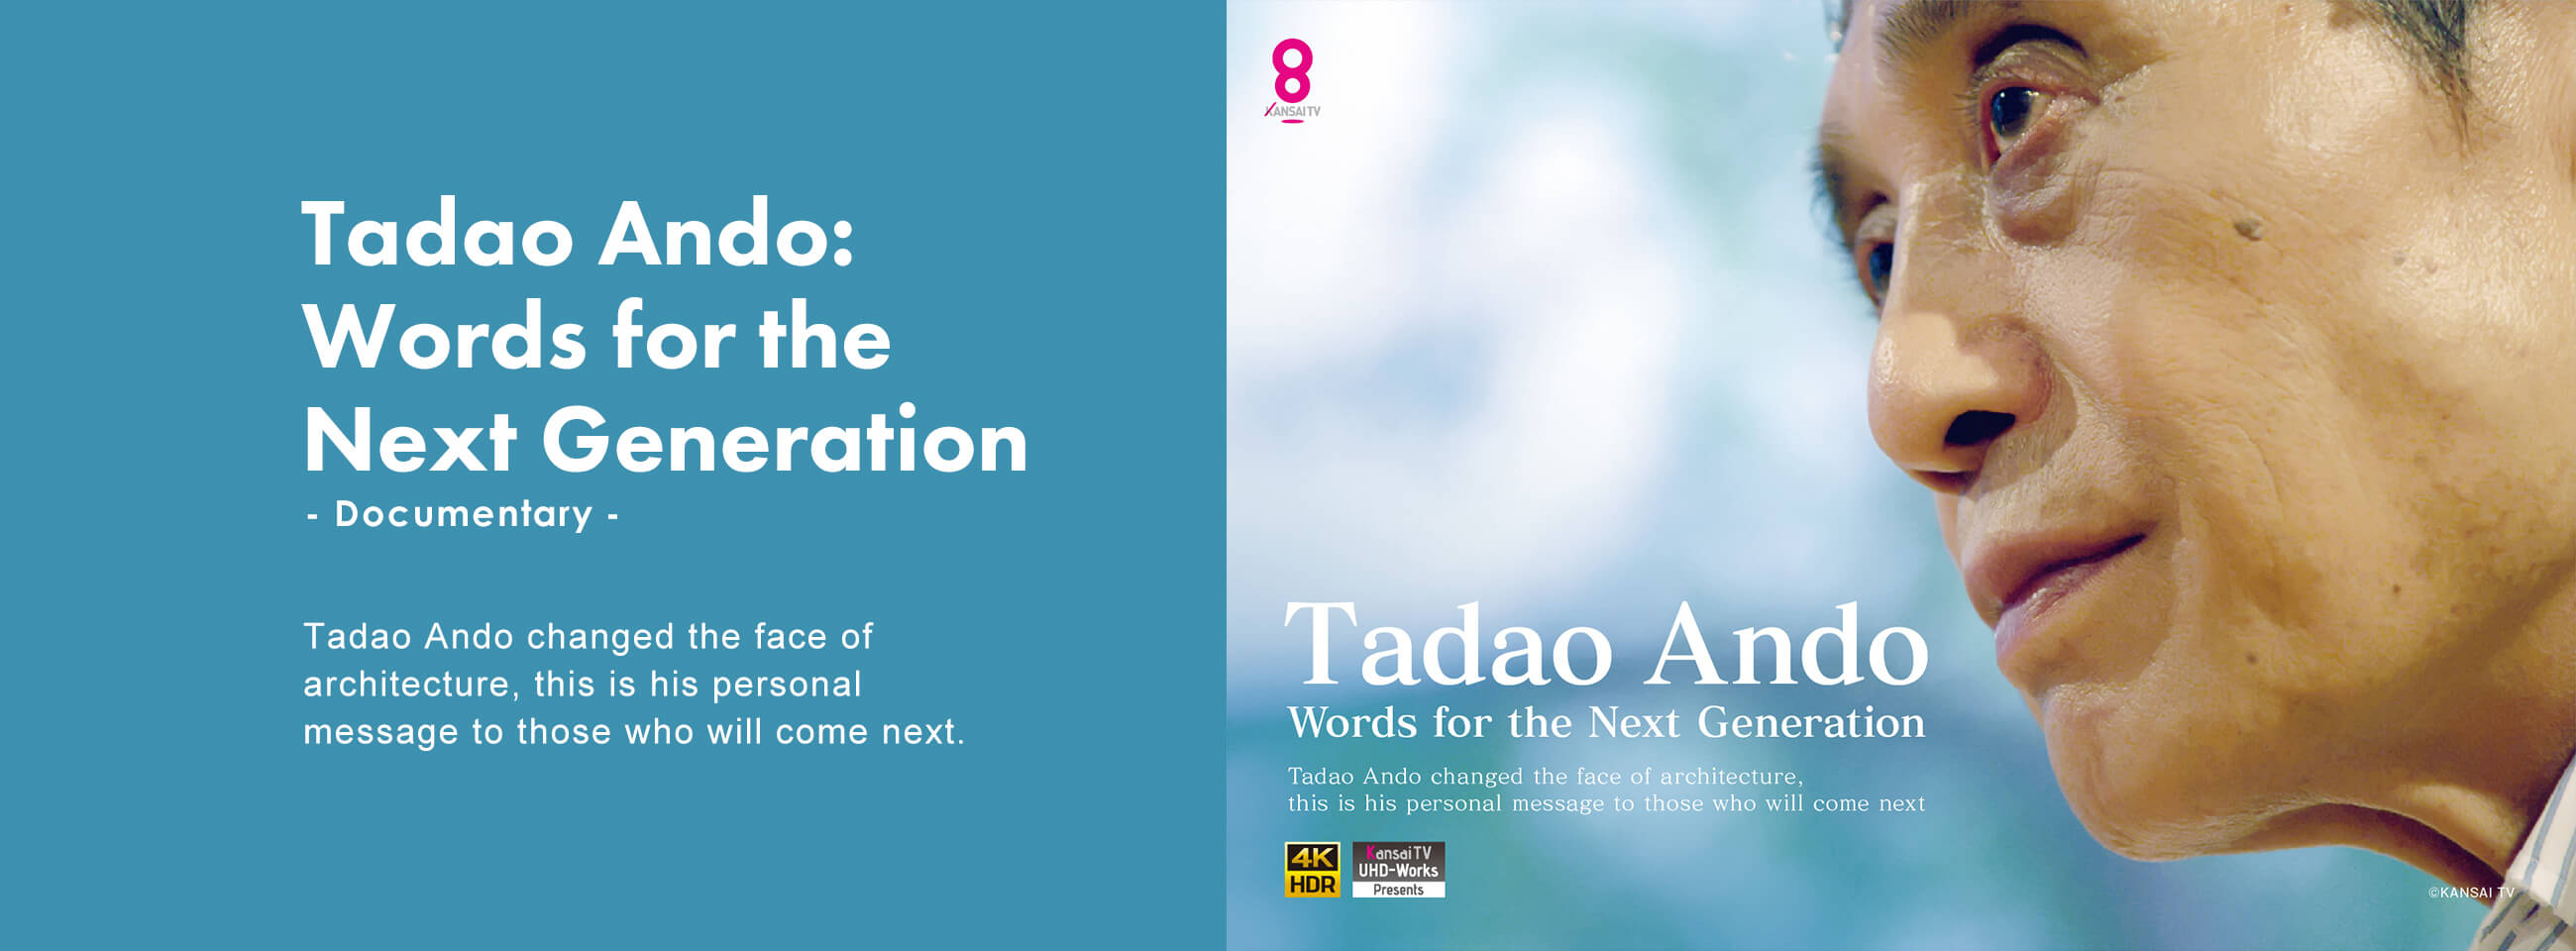 Tadao Ando: Words for the Next Generation - Documentary - Tadao Ando changed the face of architecture, this is his personal message to those who will come next.